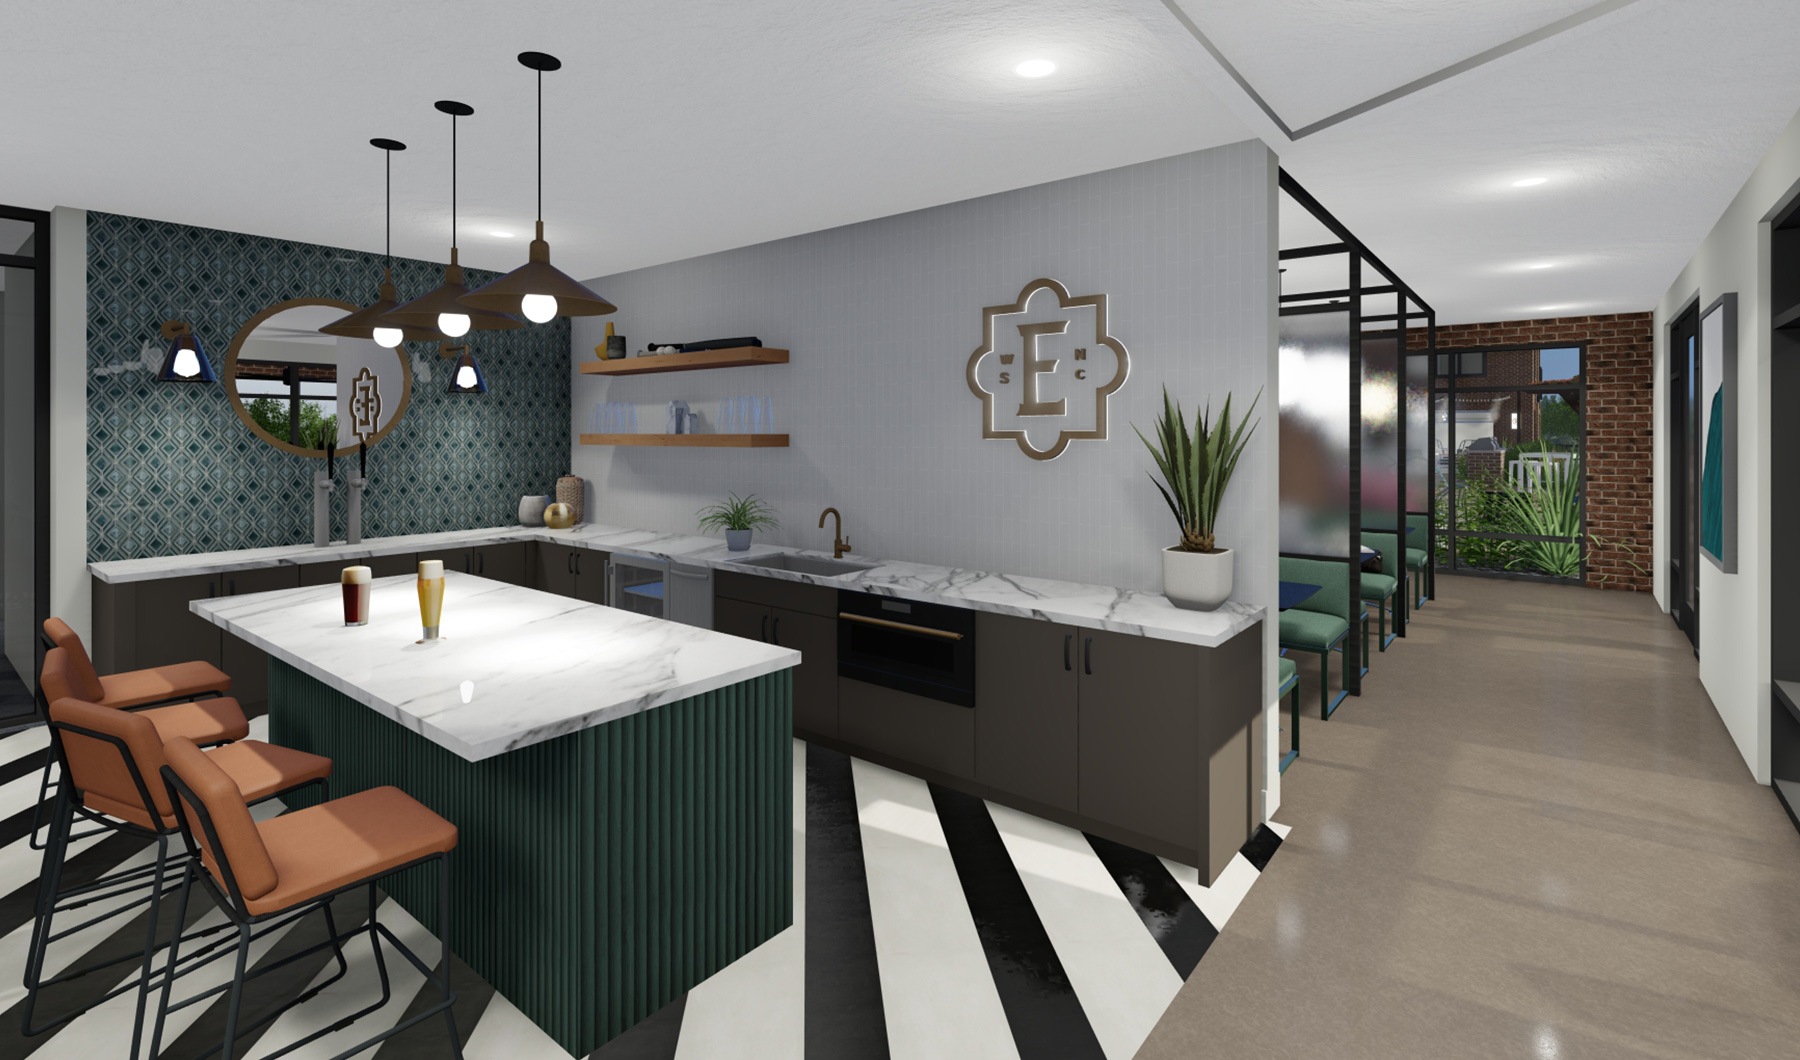 rendering of spacious kitchen with easy access to other amenity areas